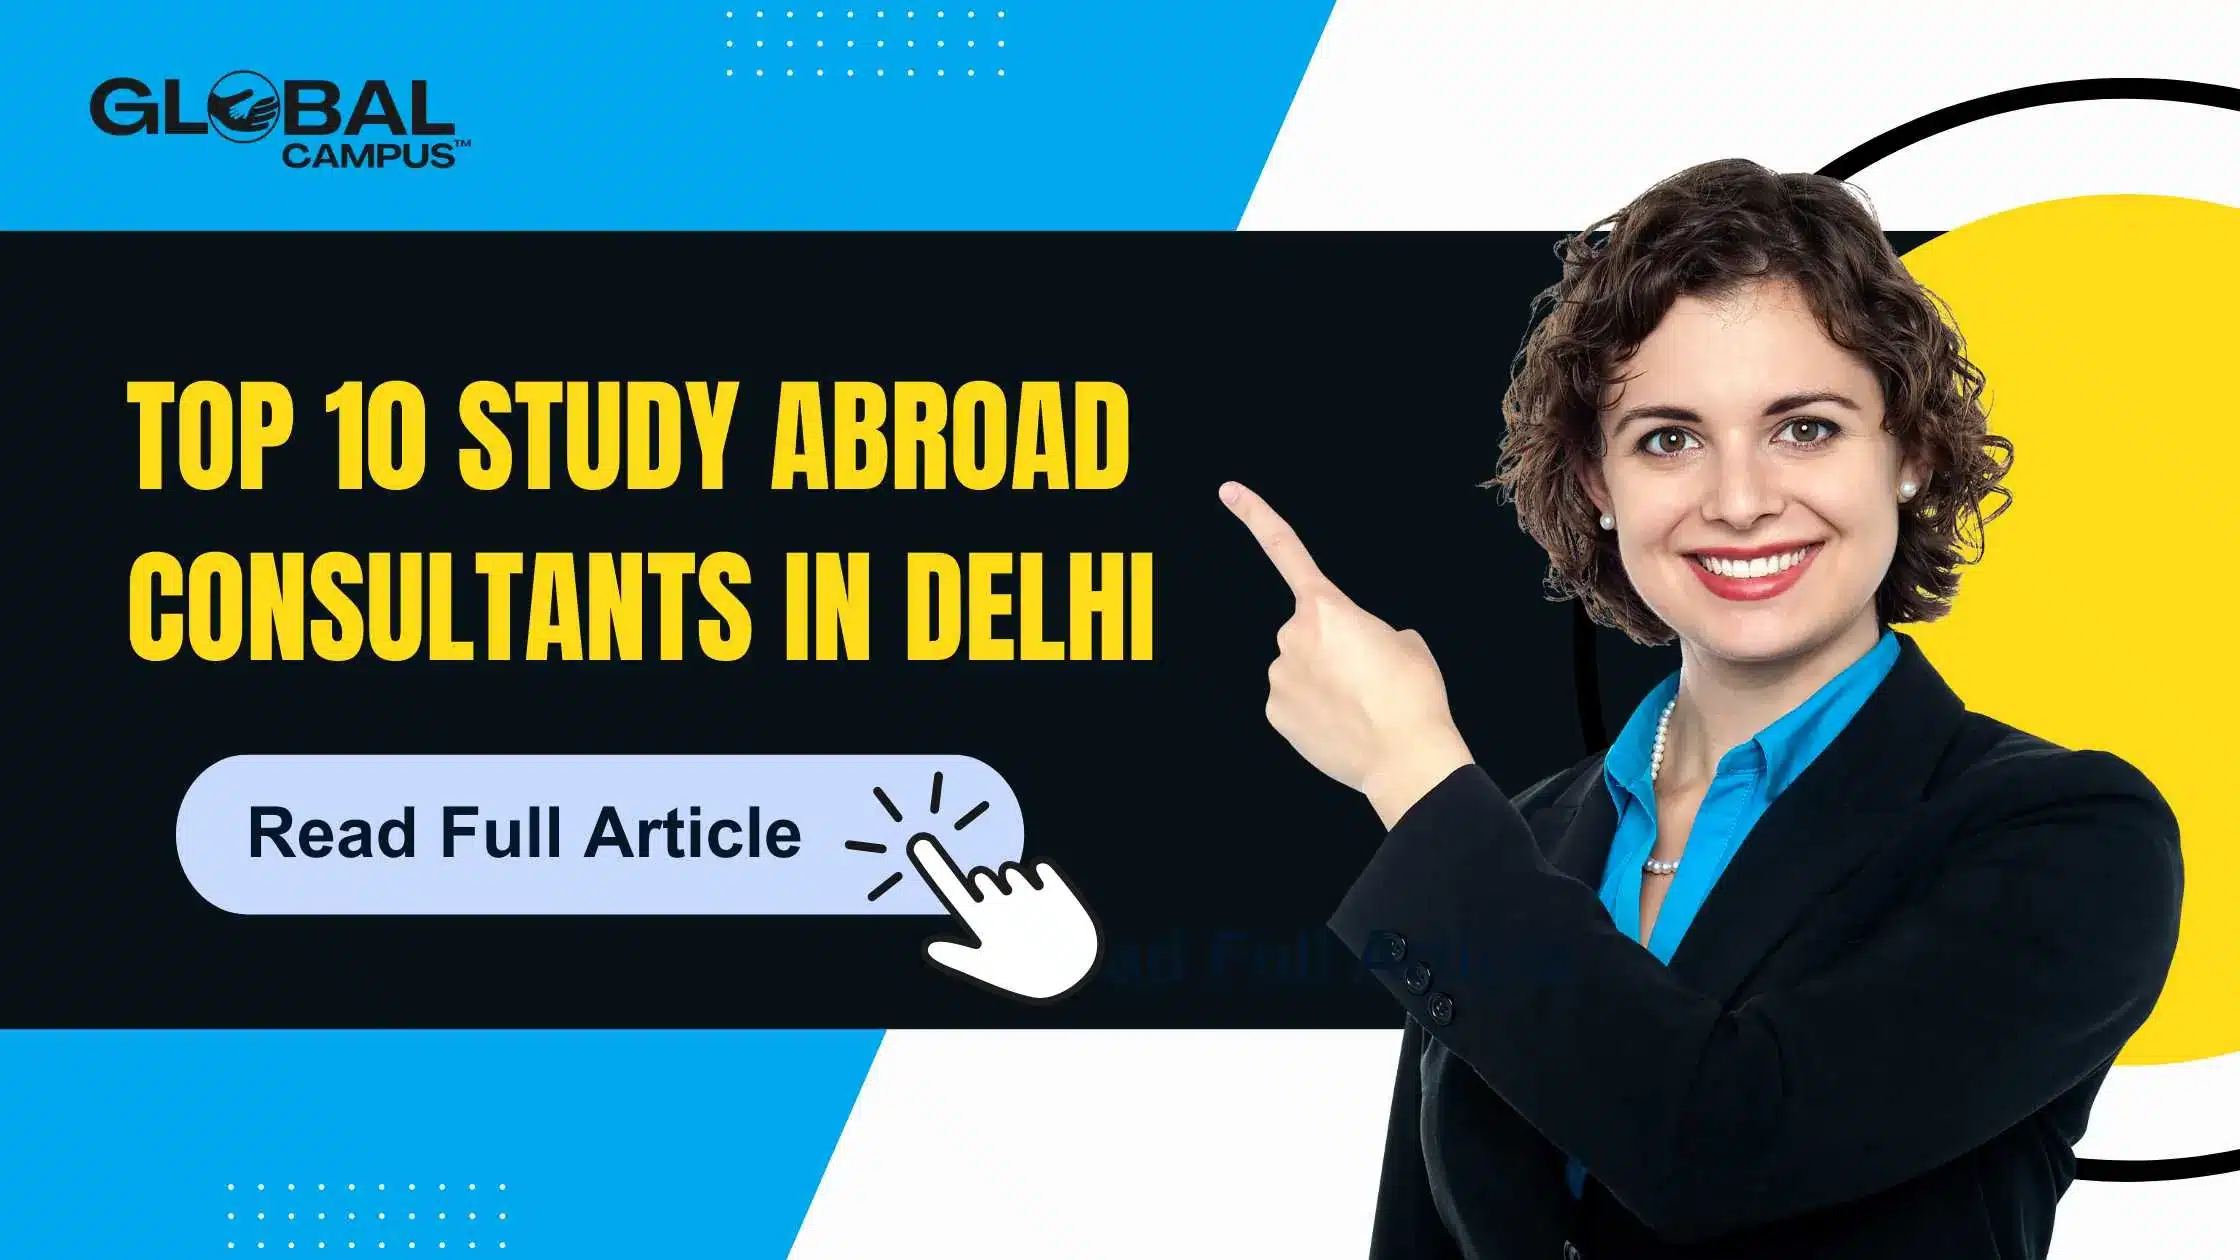 A lady points her finger on a text that mentions top 10 study abroad consultants in Delhi, NCR